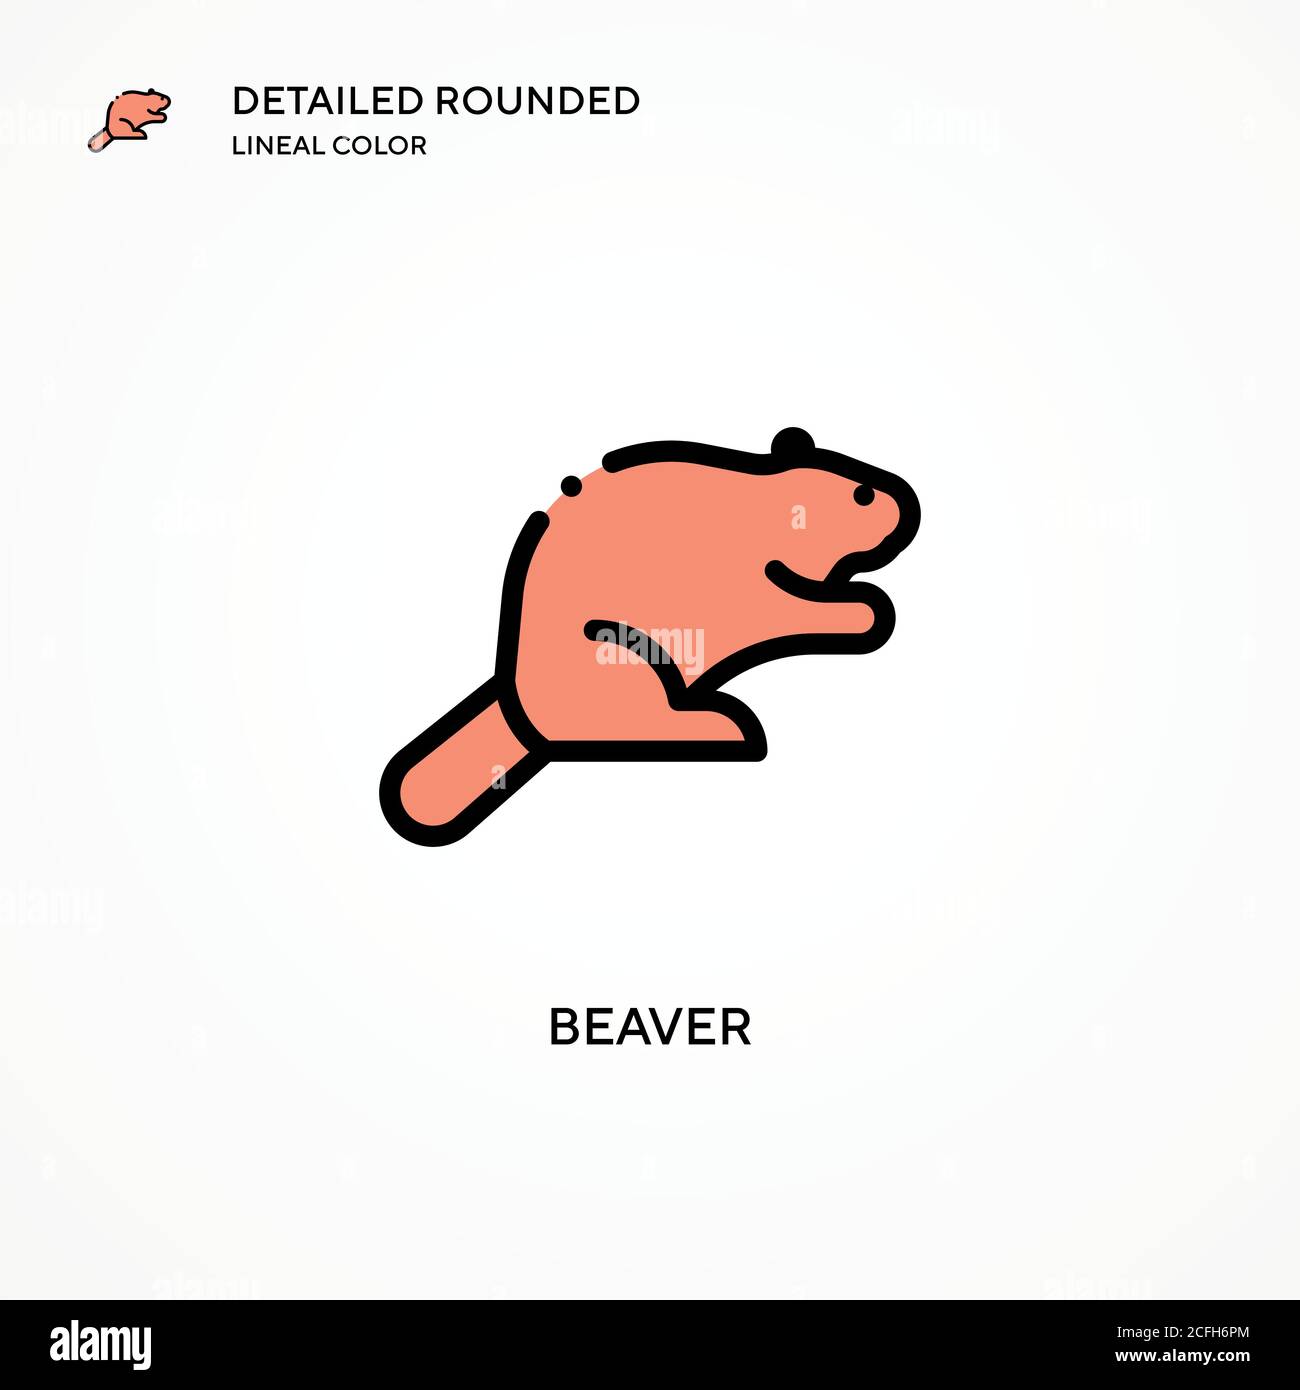 Beaver vector icon. Modern vector illustration concepts. Easy to edit and customize. Stock Vector